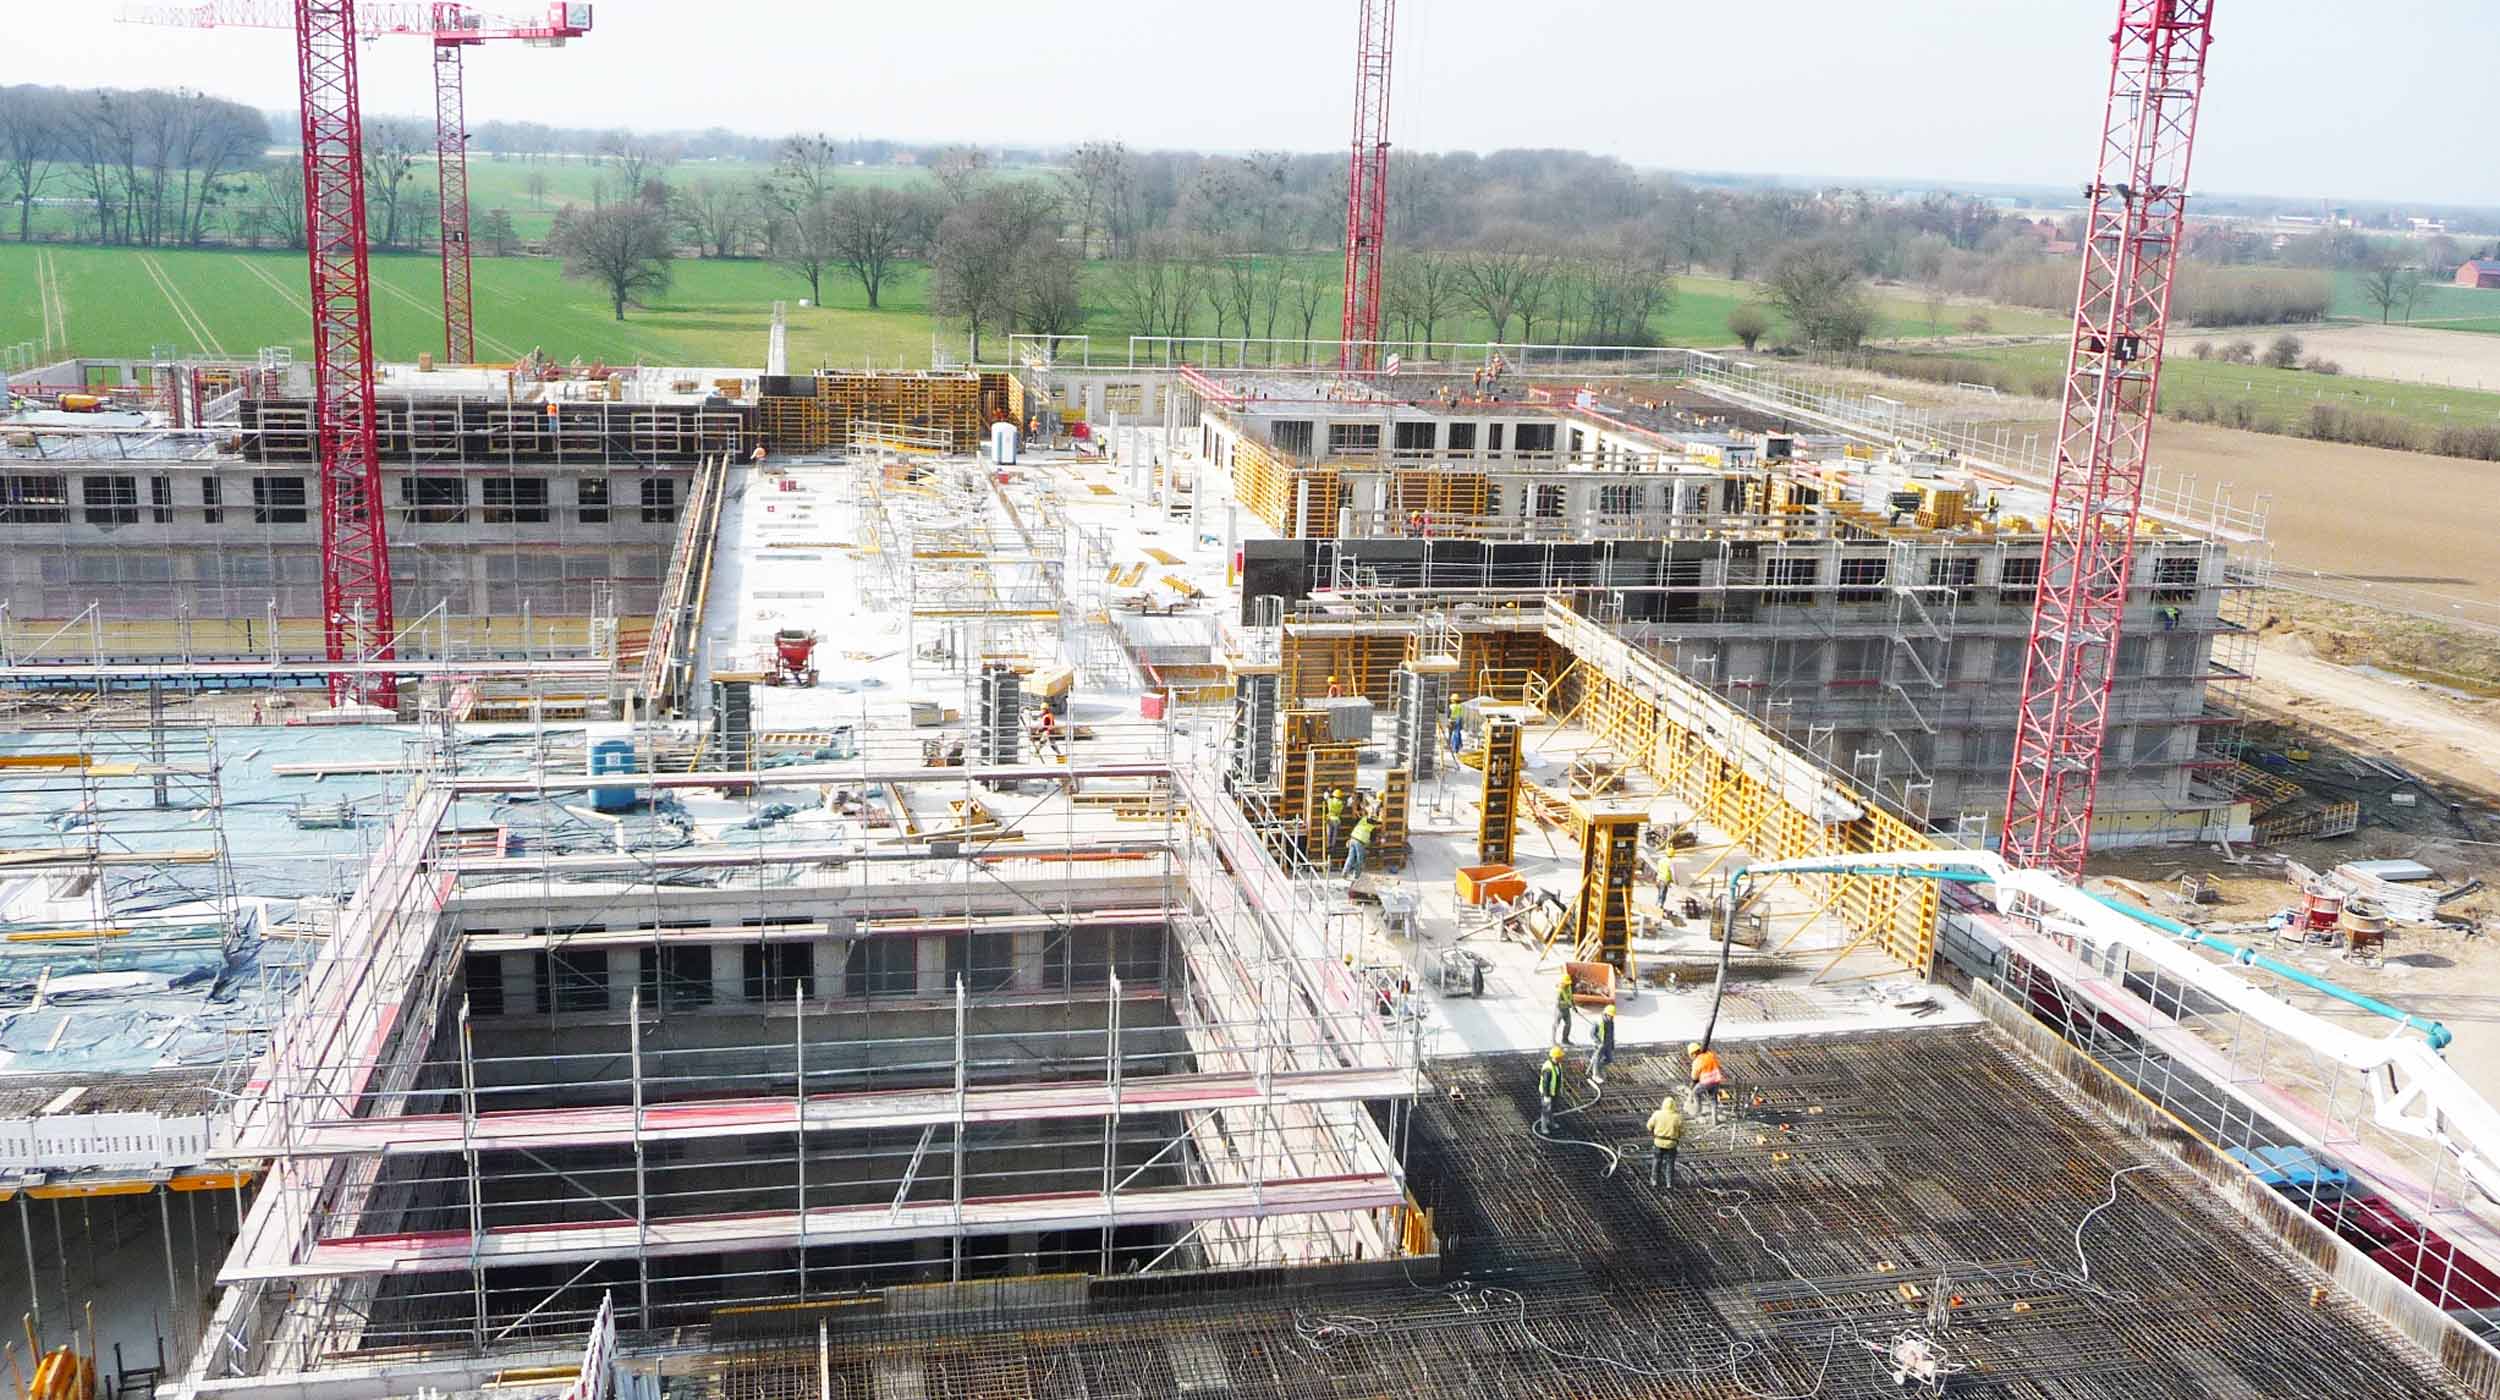 Using the CC-4 formwork system we were able to pour 30,000 m3 of concrete in situ in little more than 6 months, working under tight deadlines with demanding quality standards.